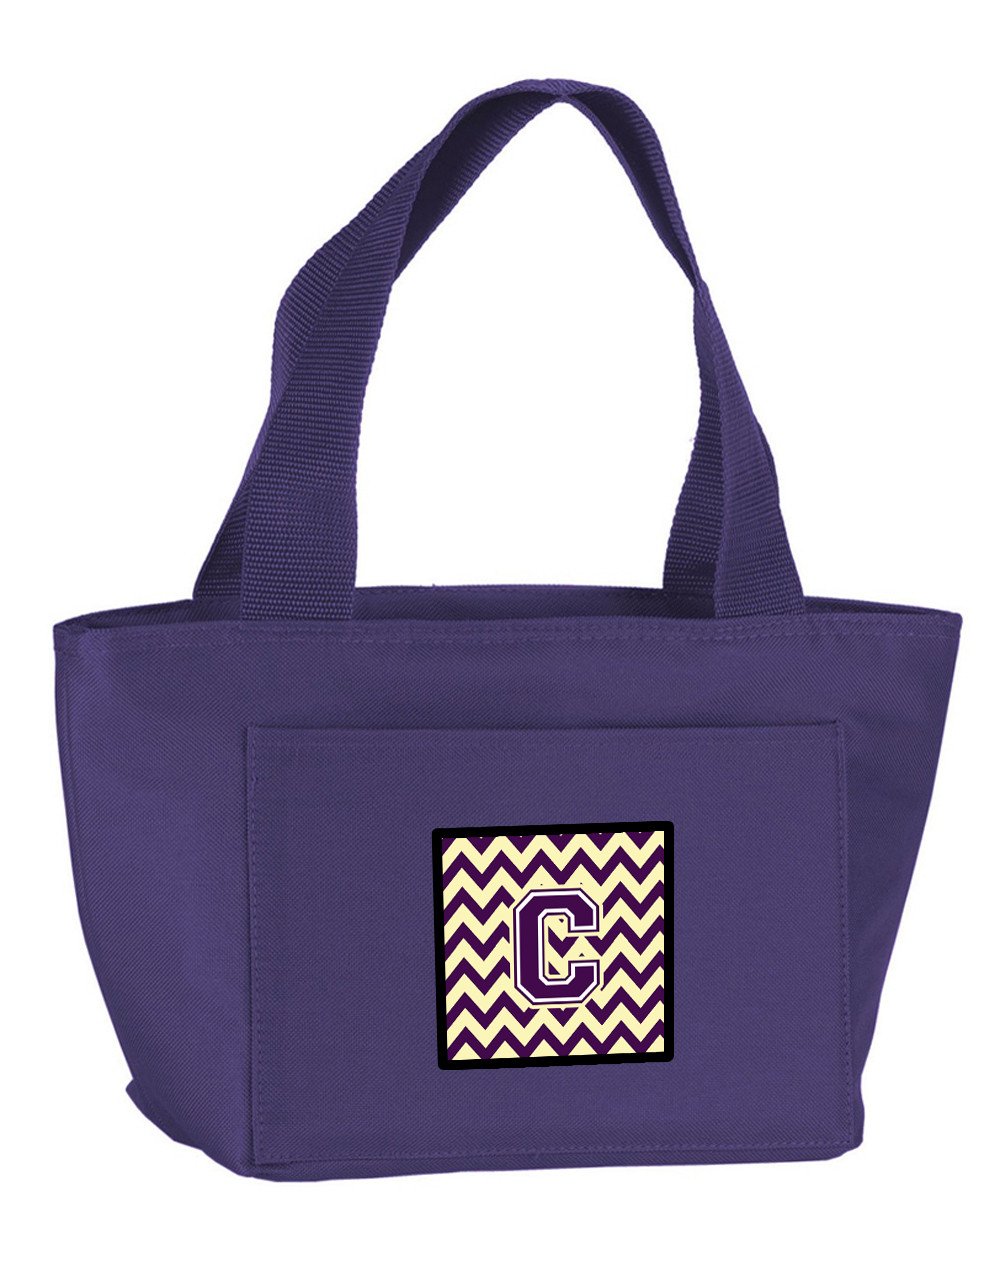 Letter C Chevron Purple and Gold Lunch Bag CJ1058-CPR-8808 by Caroline's Treasures